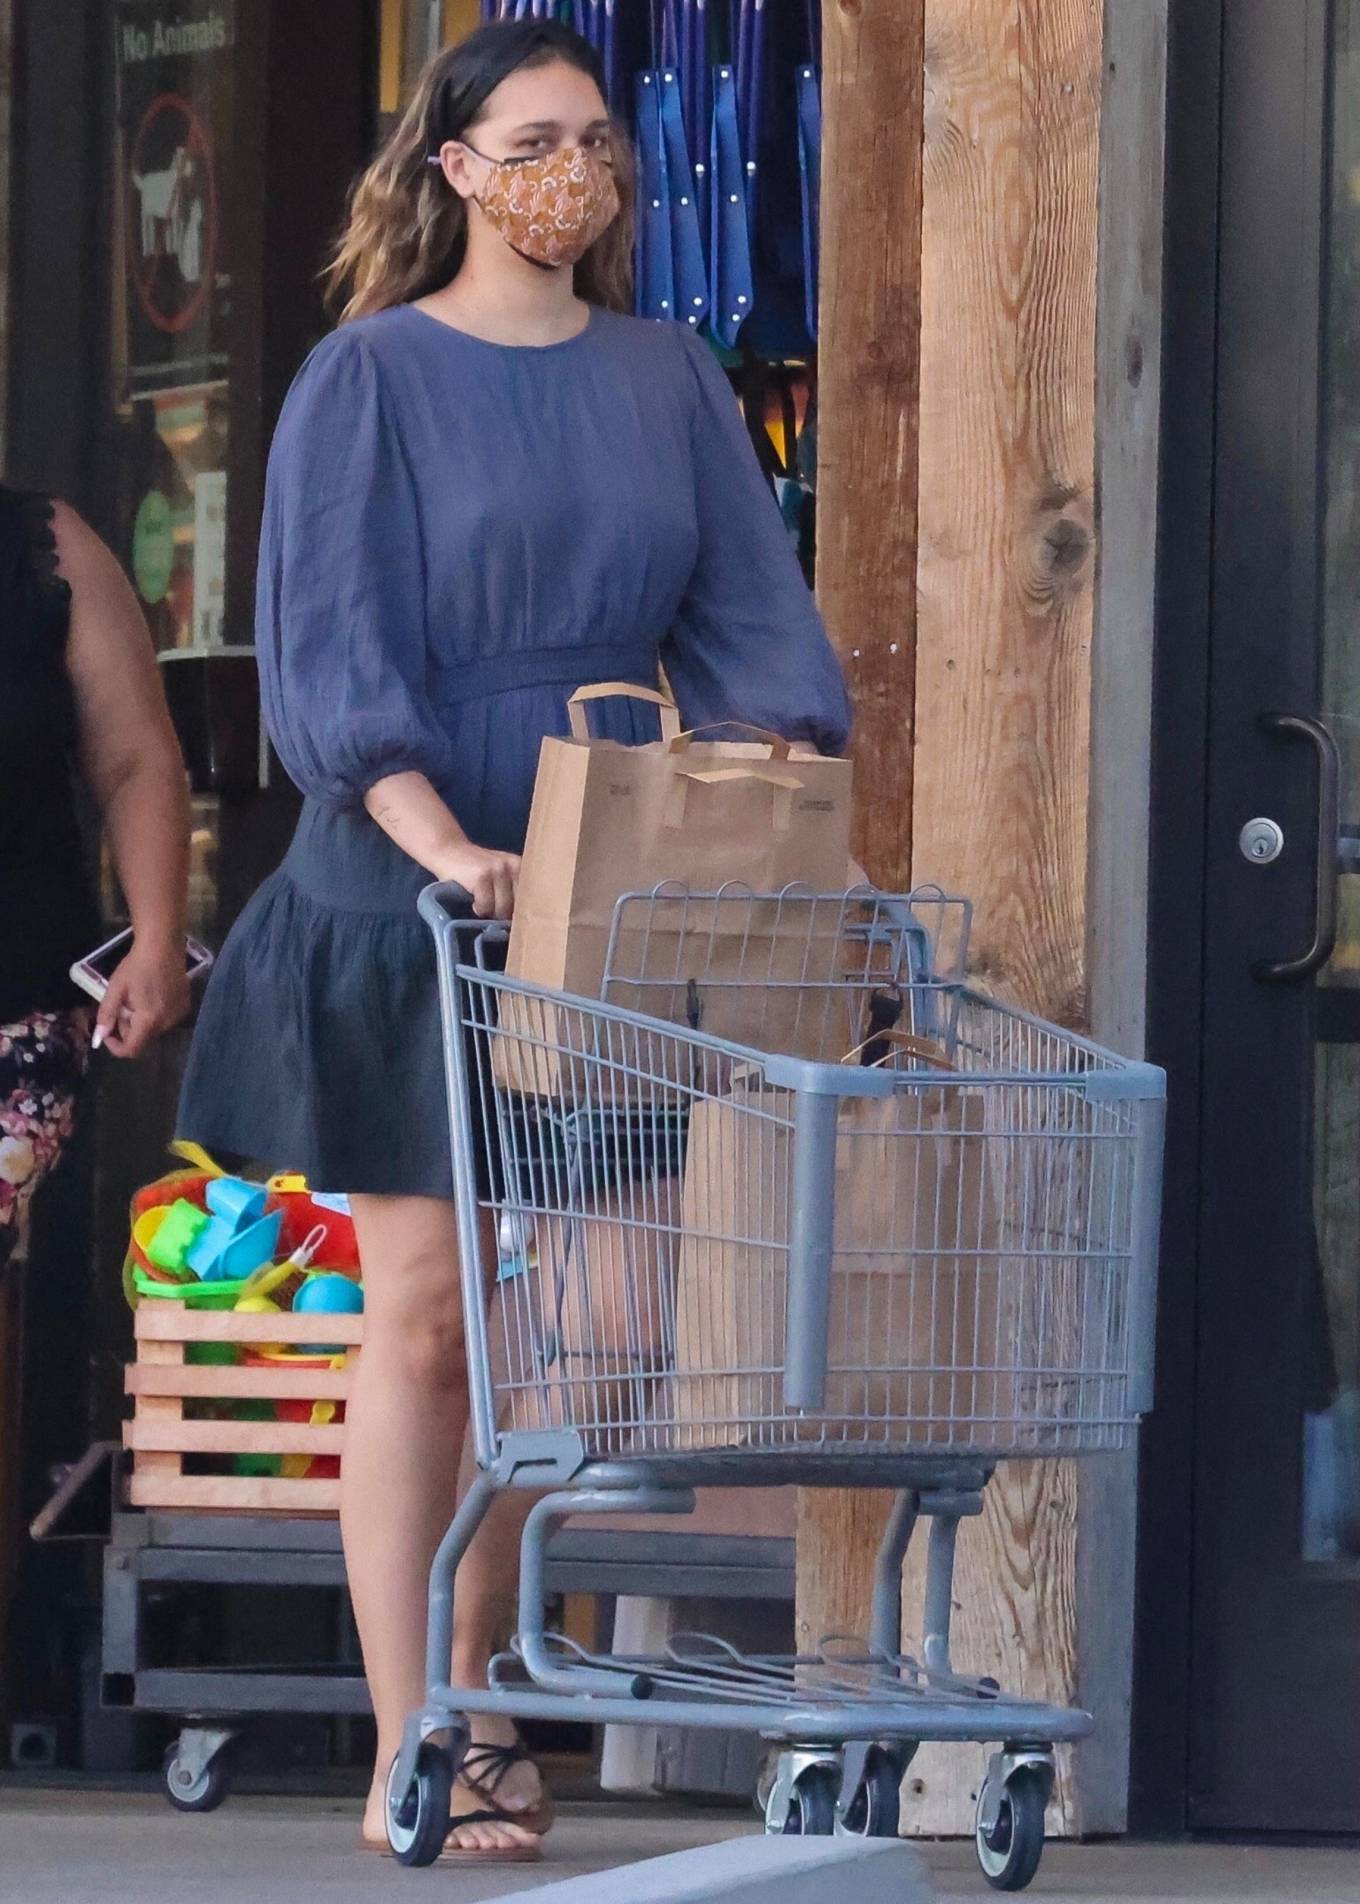 April Love Geary 2021 : April Love Geary – In blue dress shopping candids at Vintage Grocers in Malibu-07